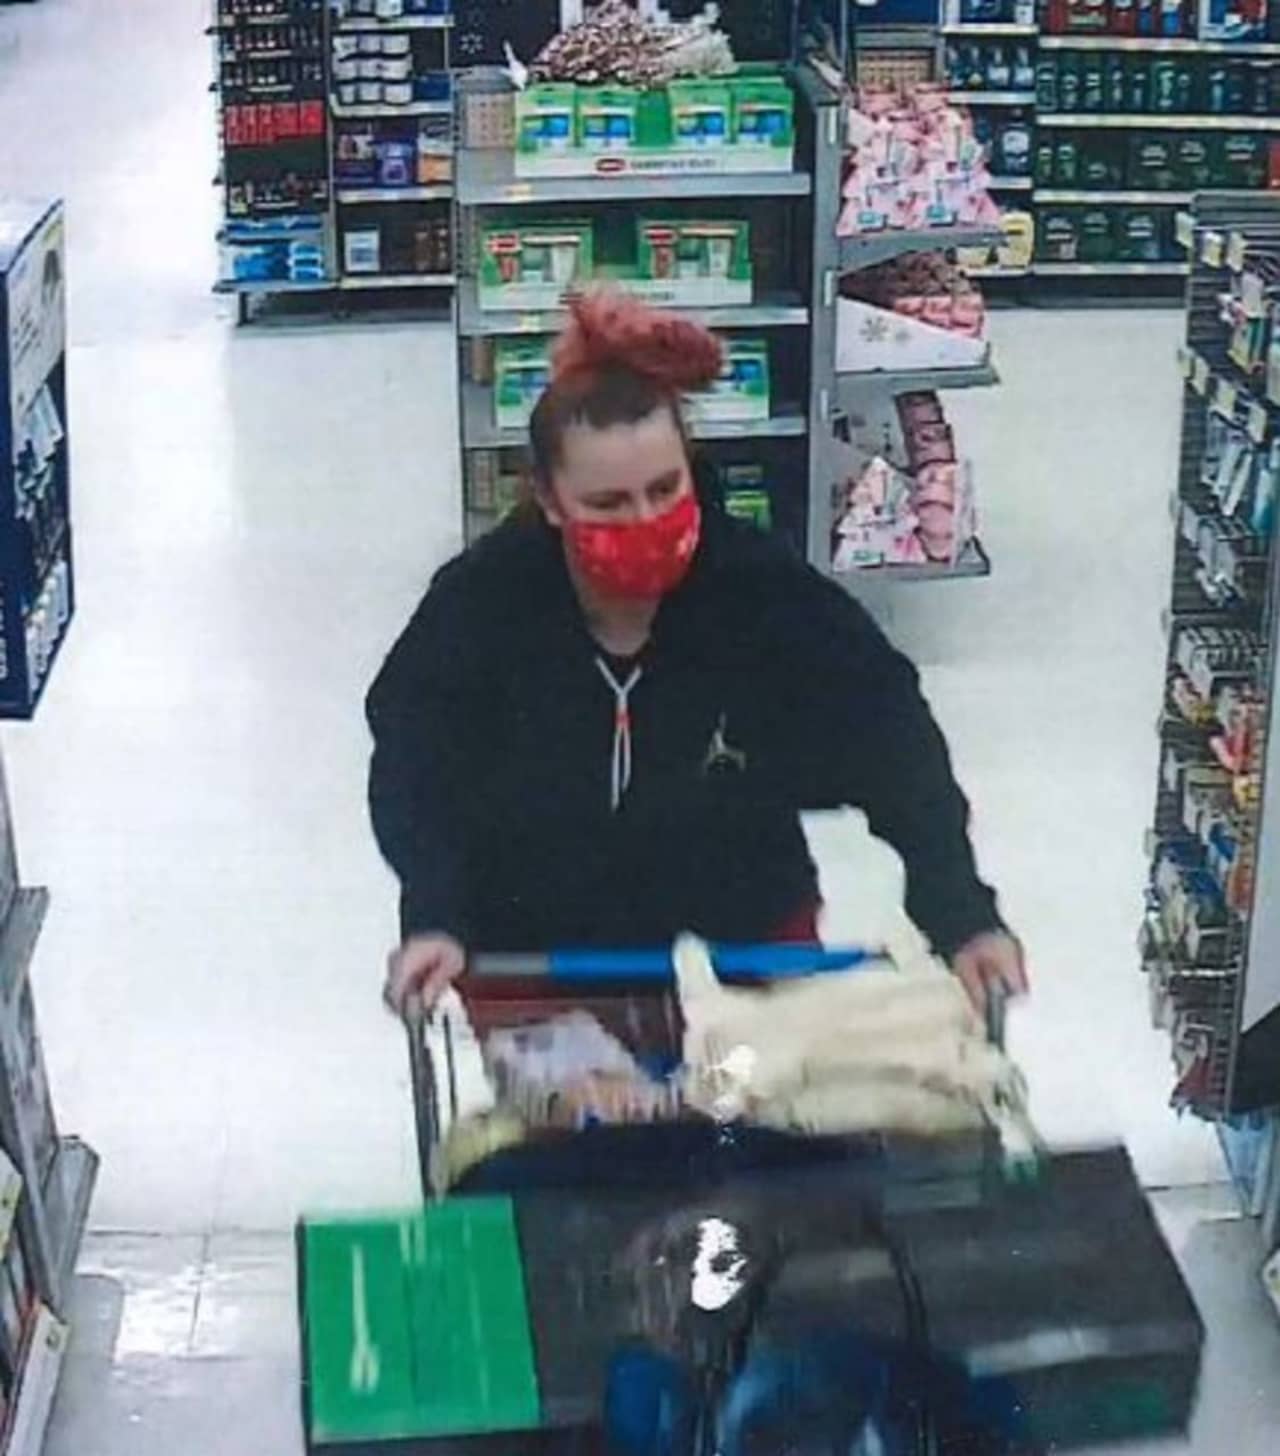 Connecticut State Police are asking the public for help identifying a suspect accused of shoplifting from a Walmart.